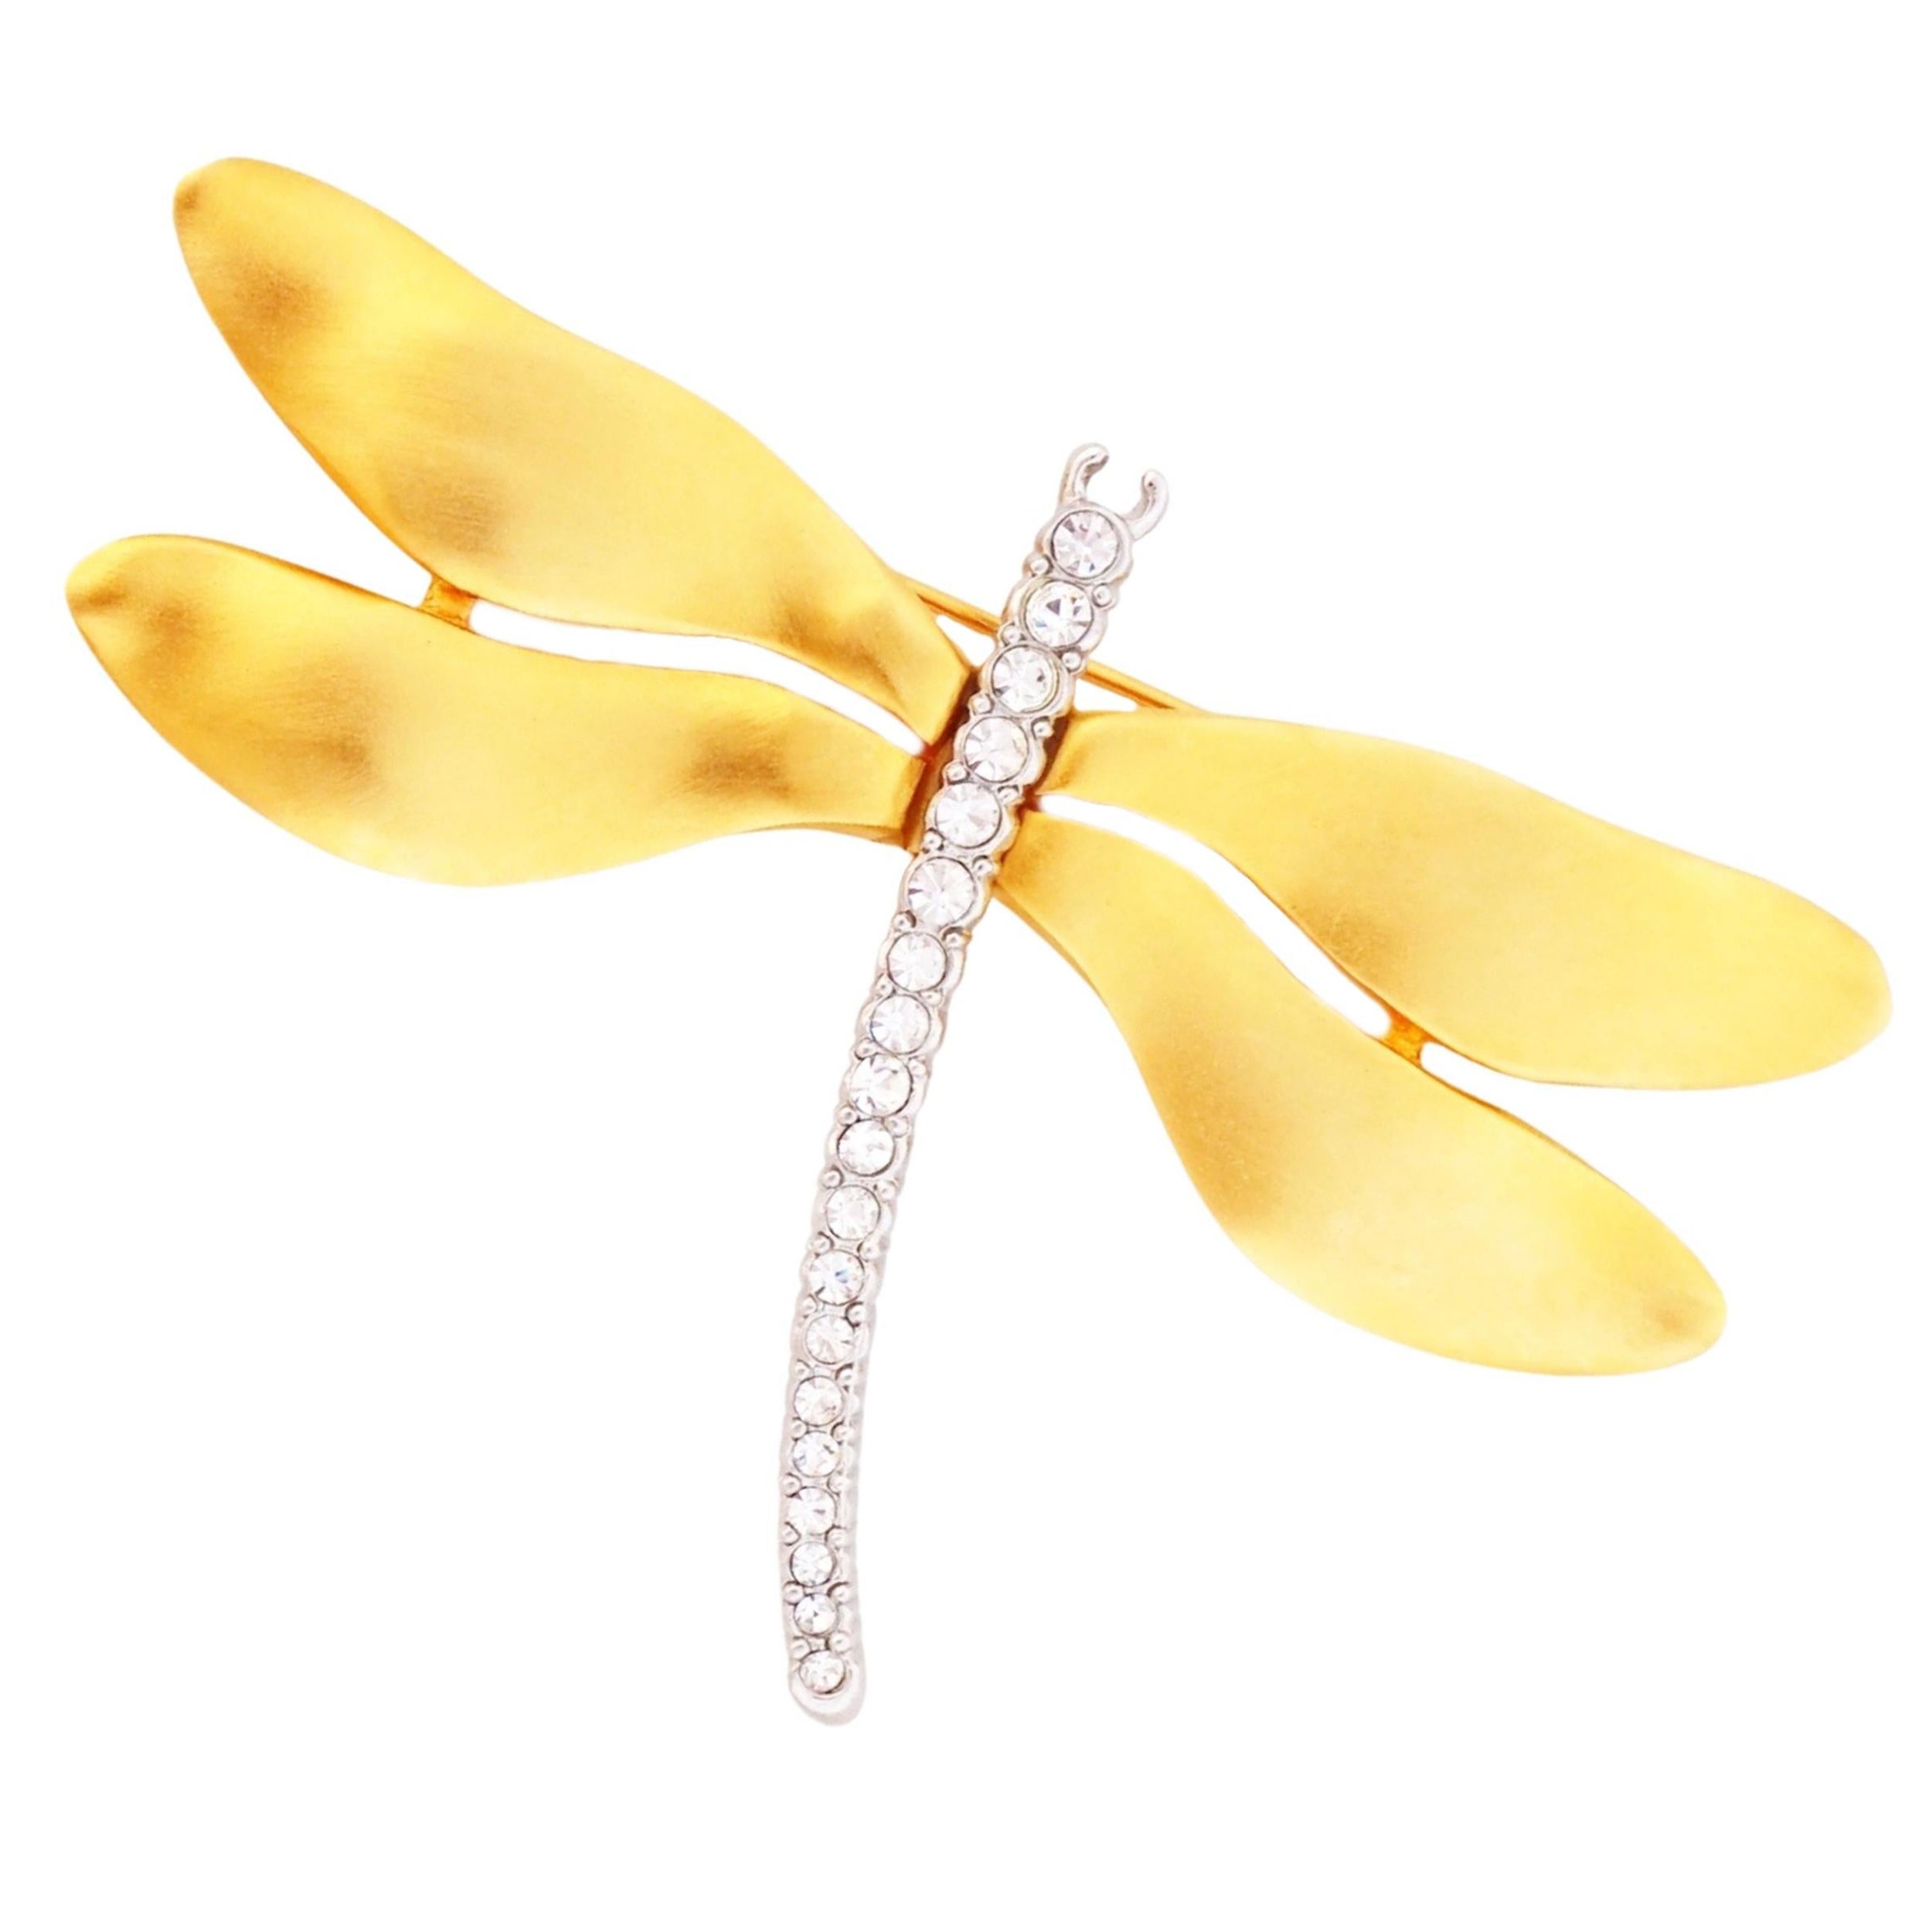 Gilded Winged Dragonfly Figural Brooch With Crystals By Kenneth Jay Lane, 1980s